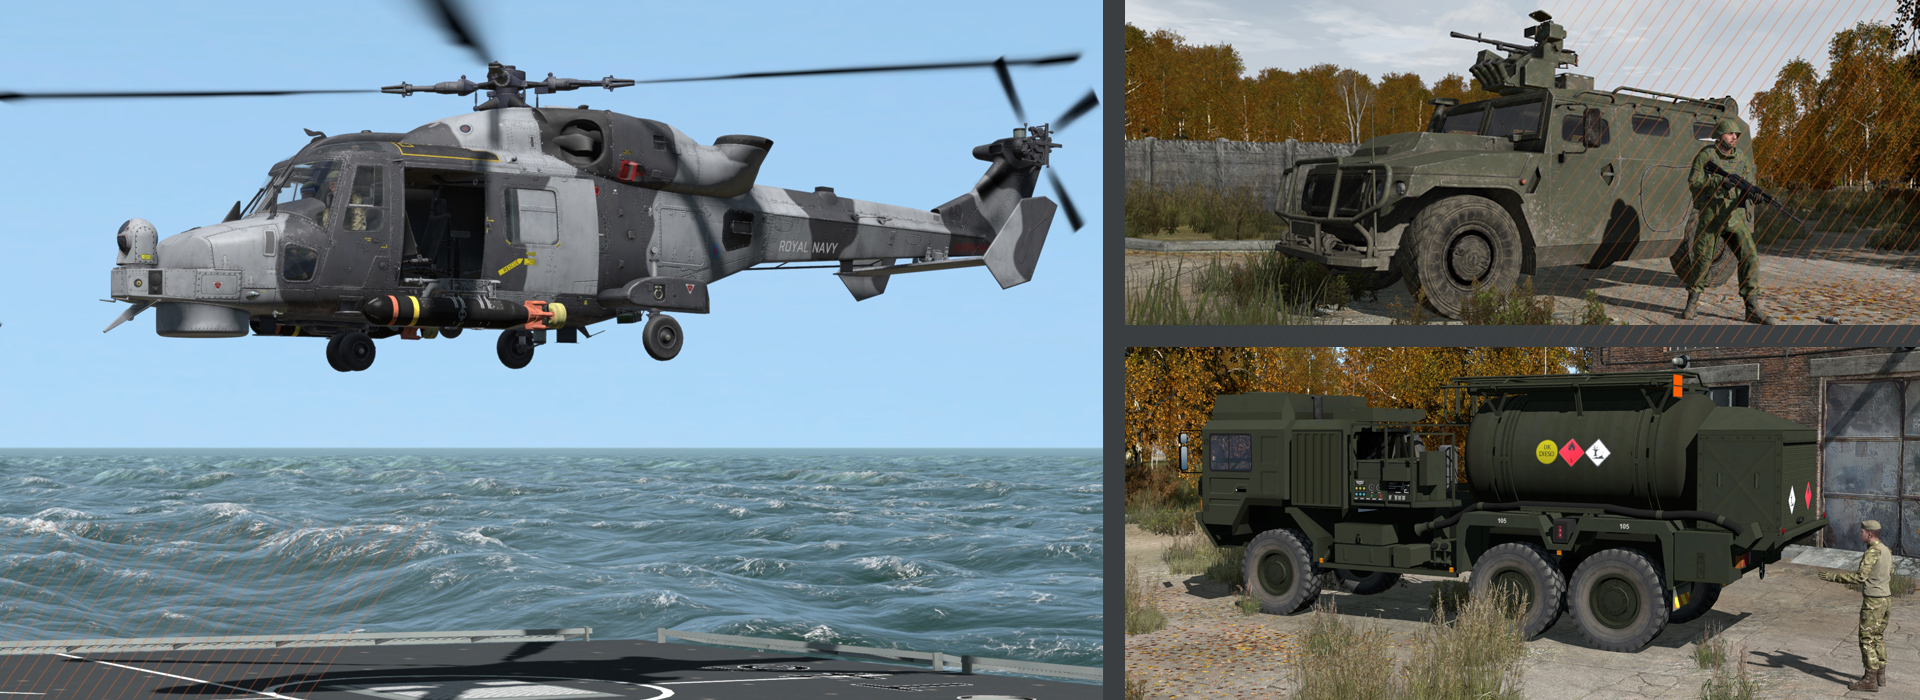 vbs3_v1834_patch_enhances_radio_capabilities_provides_high_detail_engineering_vehicle_models_and_offers_new_terrains_for_virtual_training